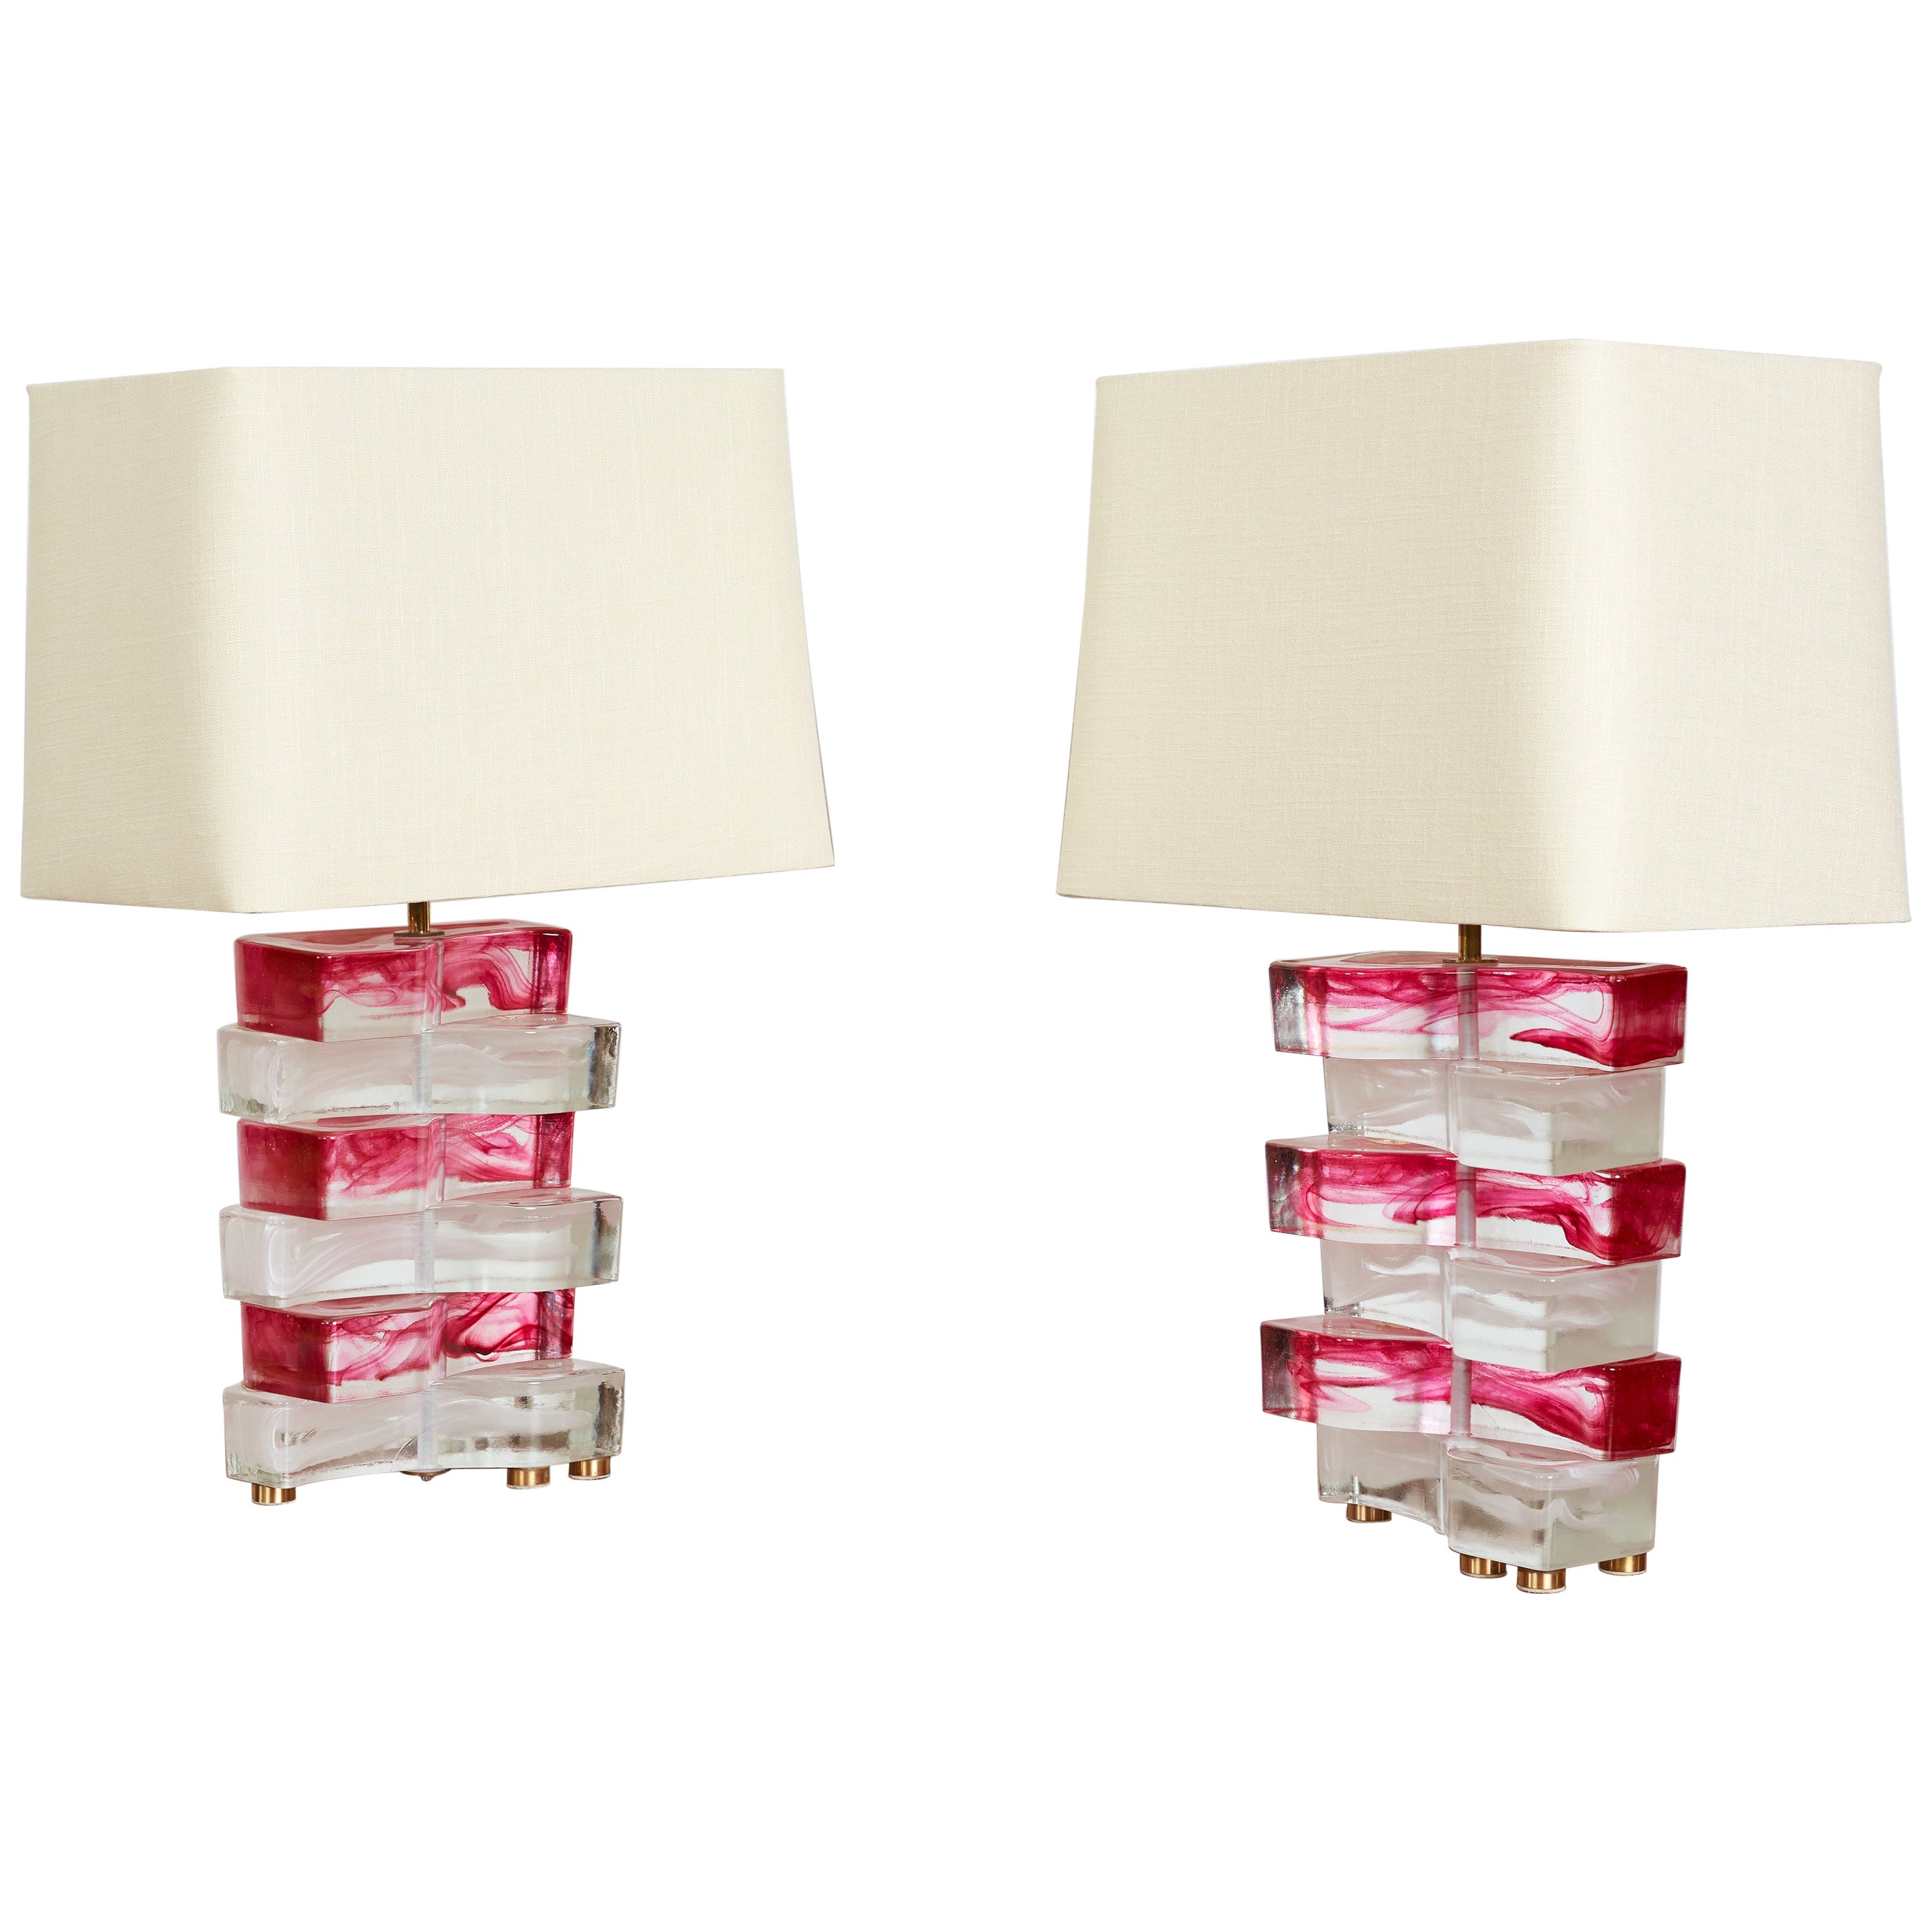 Pair of Poliarte Table Lamps